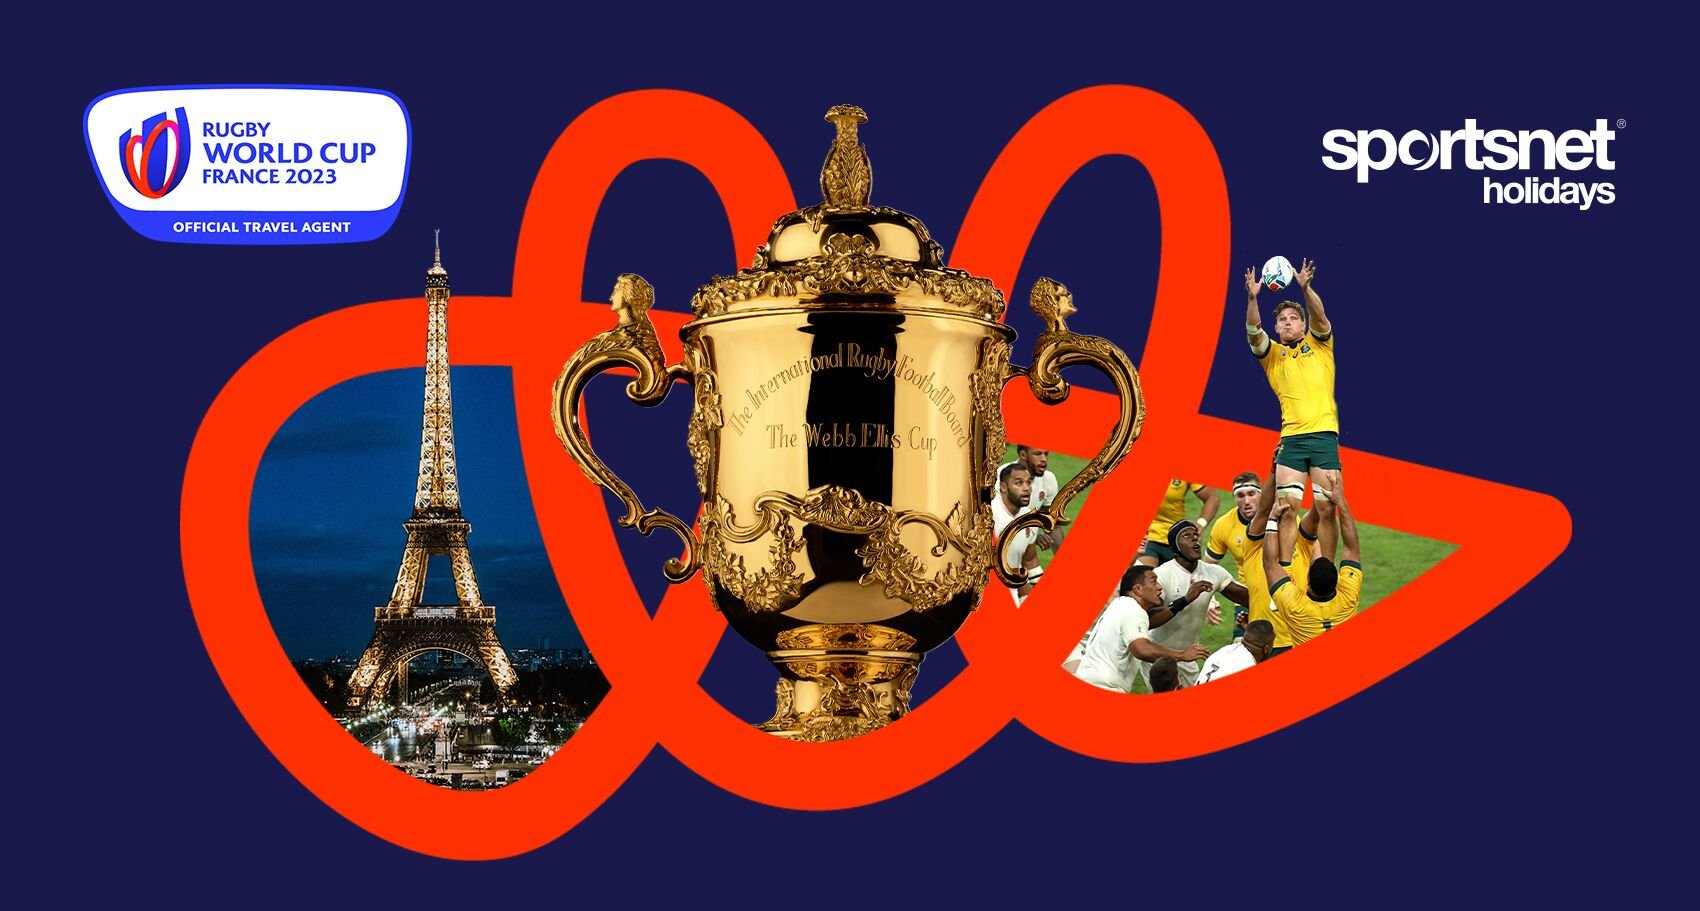 RUGBY WORLD CUP 2023 — Shakespeare Pub